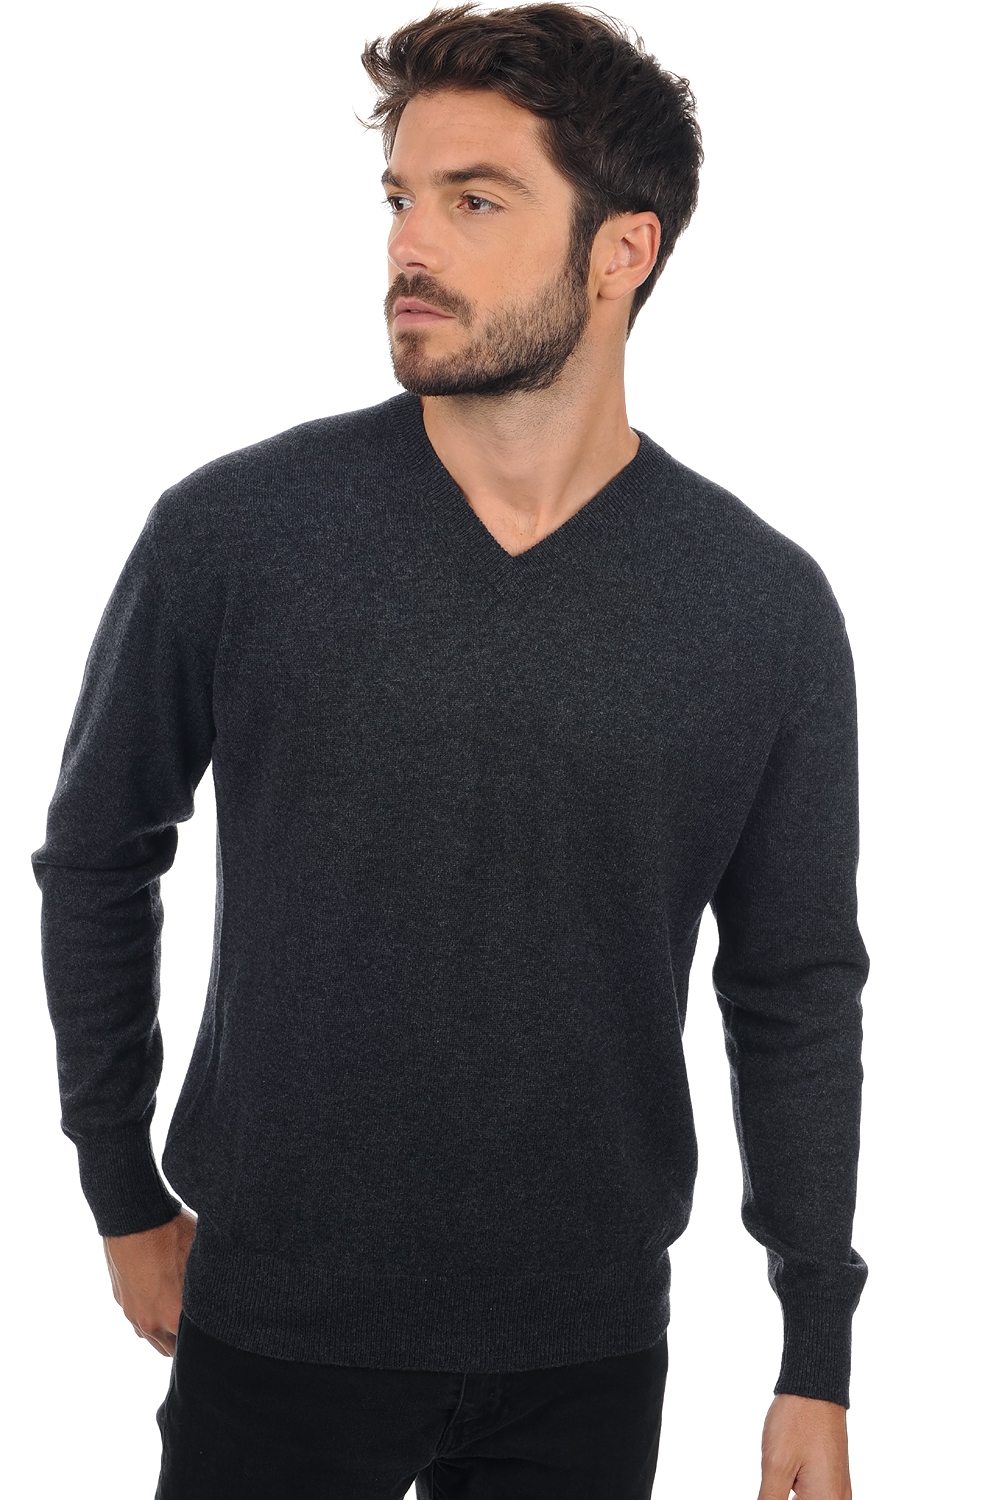 Cachemire pull homme les intemporels hippolyte anthracite chine 3xl